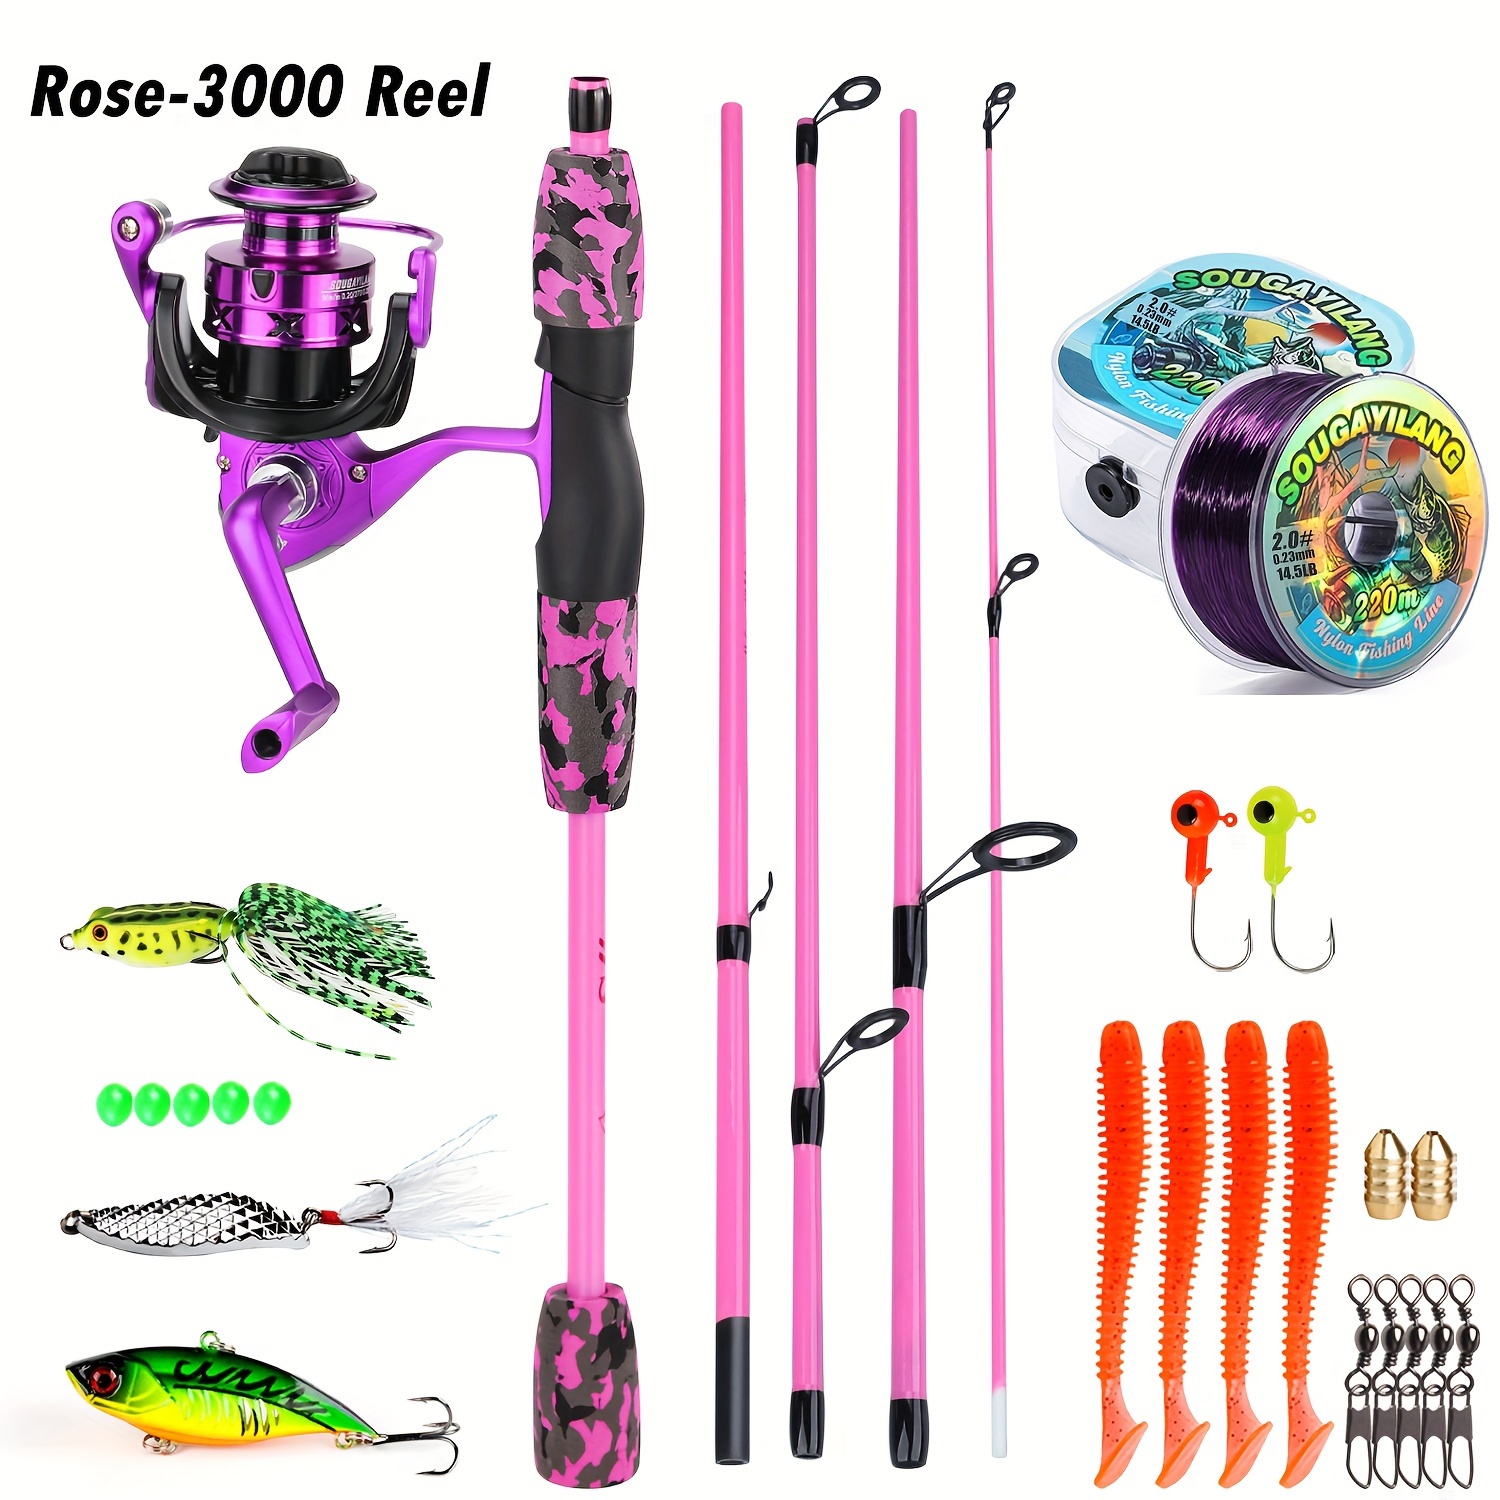 Cheap, Durable, and Sturdy Fishing Pole For All 